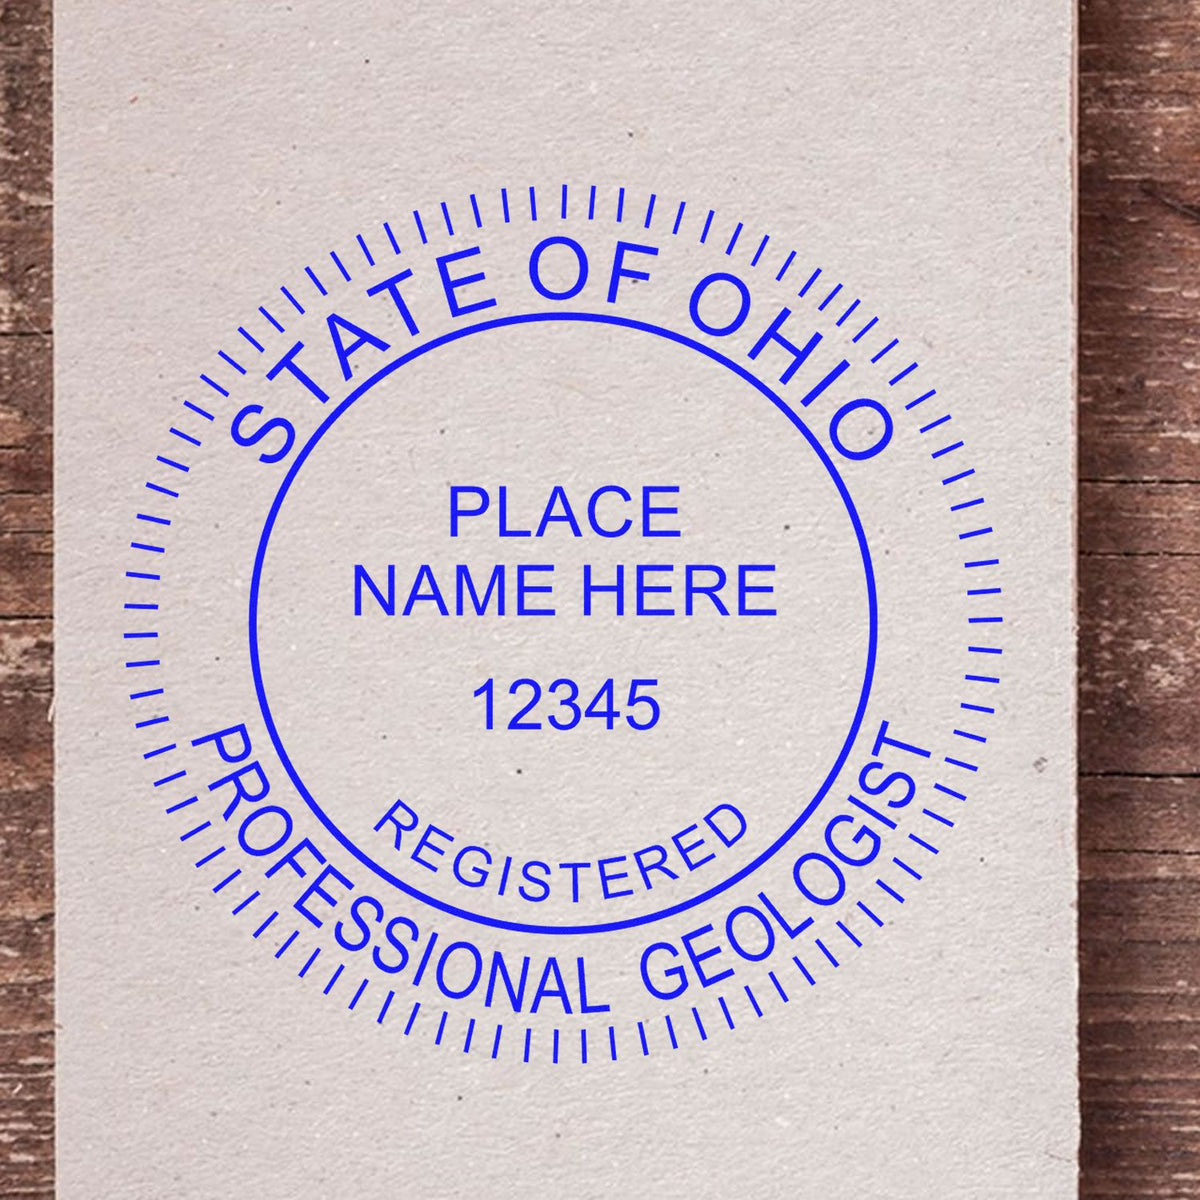 An alternative view of the Self-Inking Ohio Geologist Stamp stamped on a sheet of paper showing the image in use